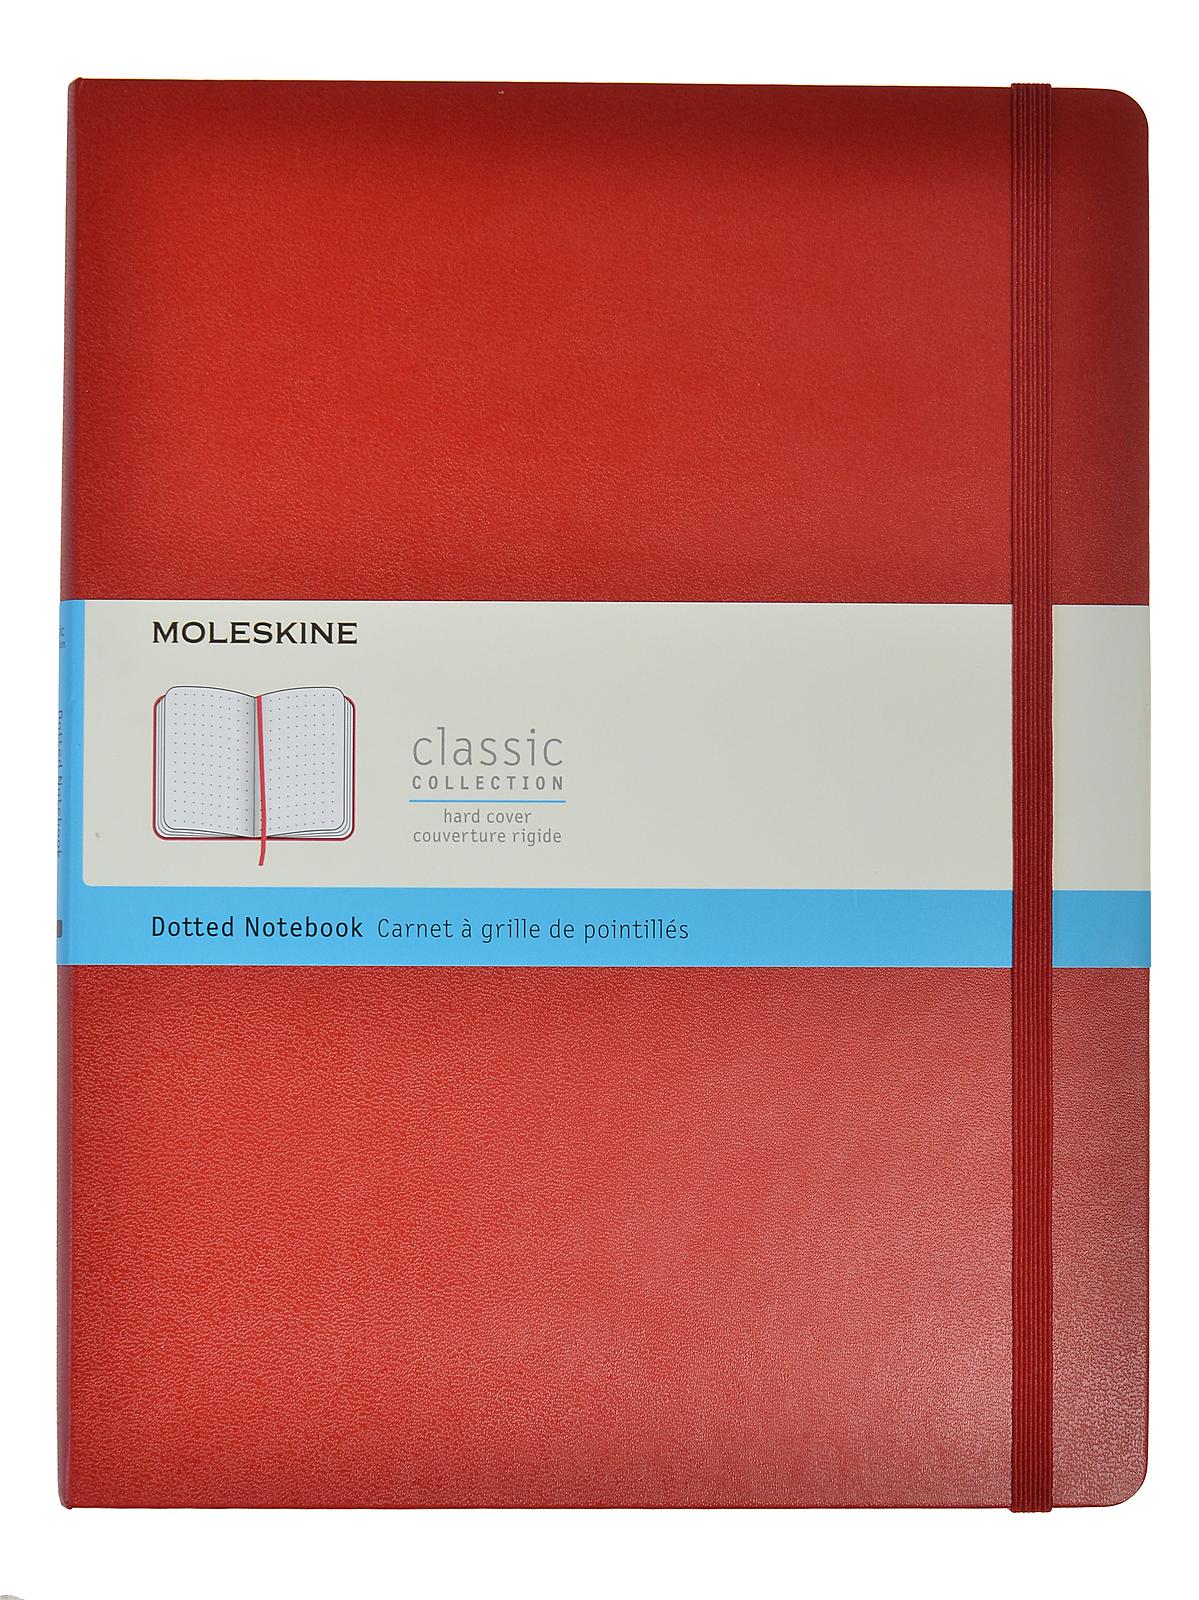 Classic Hard Cover Notebooks Red 7 1 2 In. X 9 3 4 In. 192 Pages, Dotted